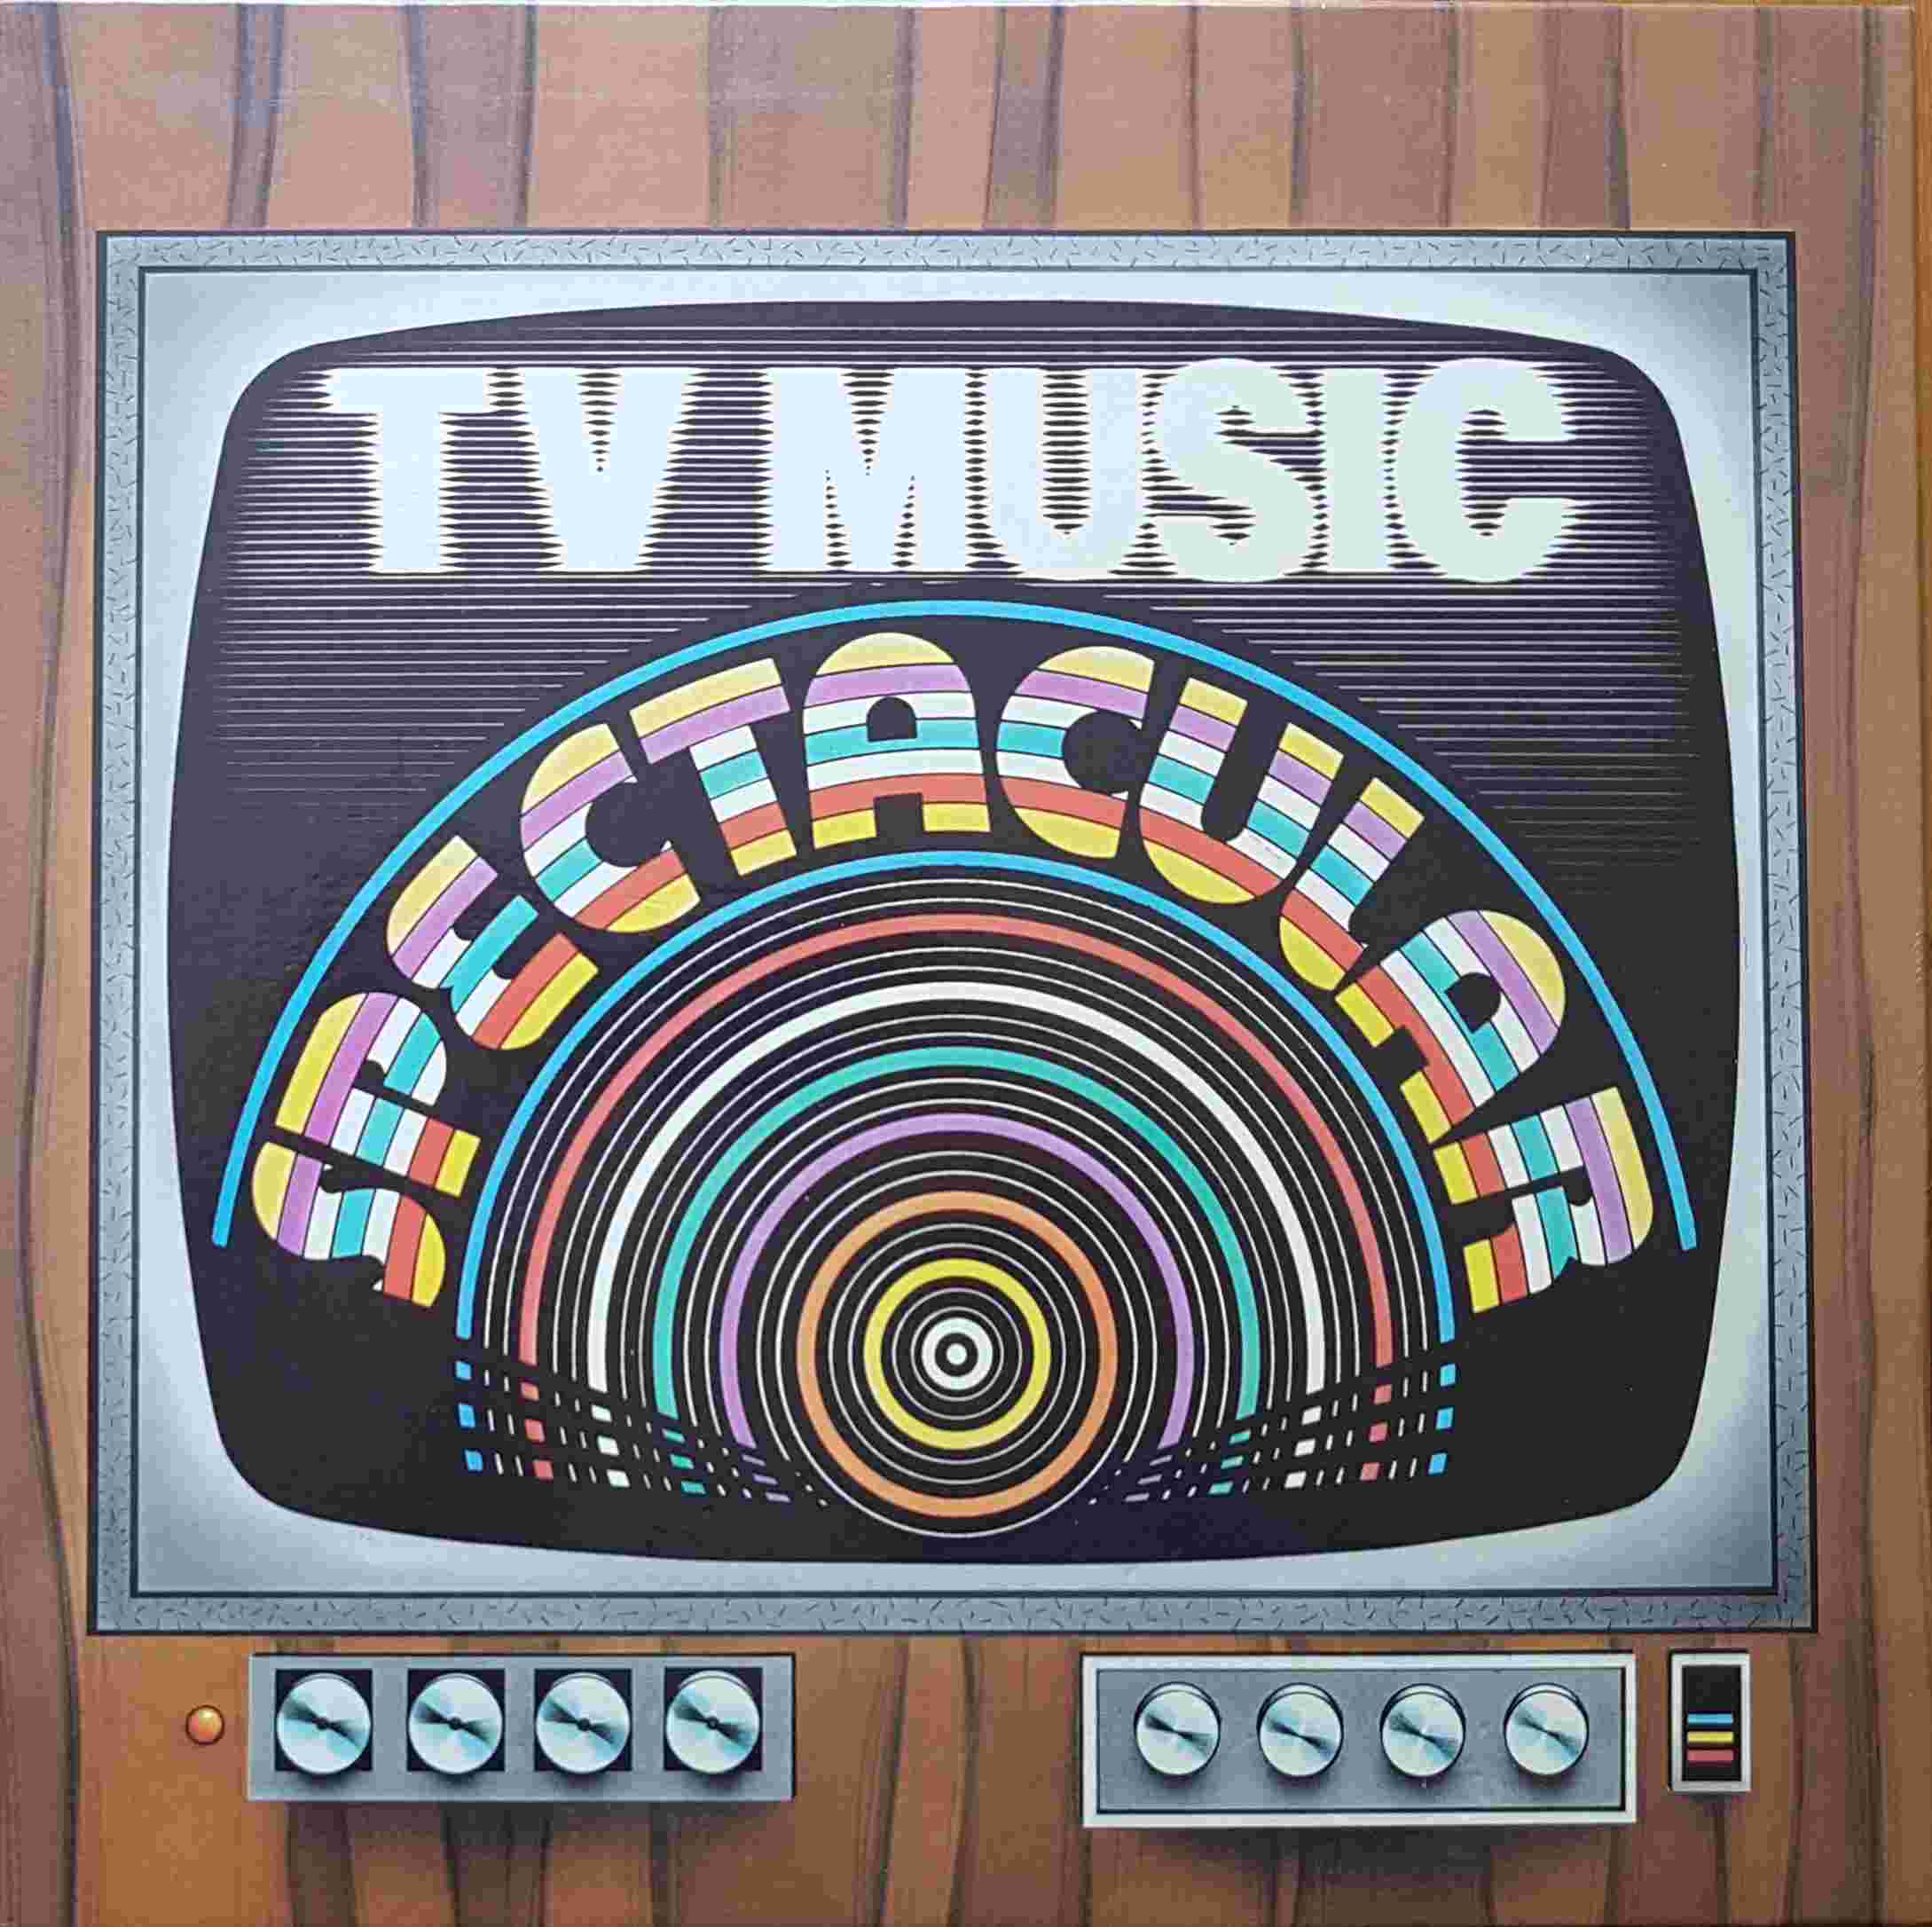 Picture of TV music spectacular by artist Various from ITV, Channel 4 and Channel 5 albums library